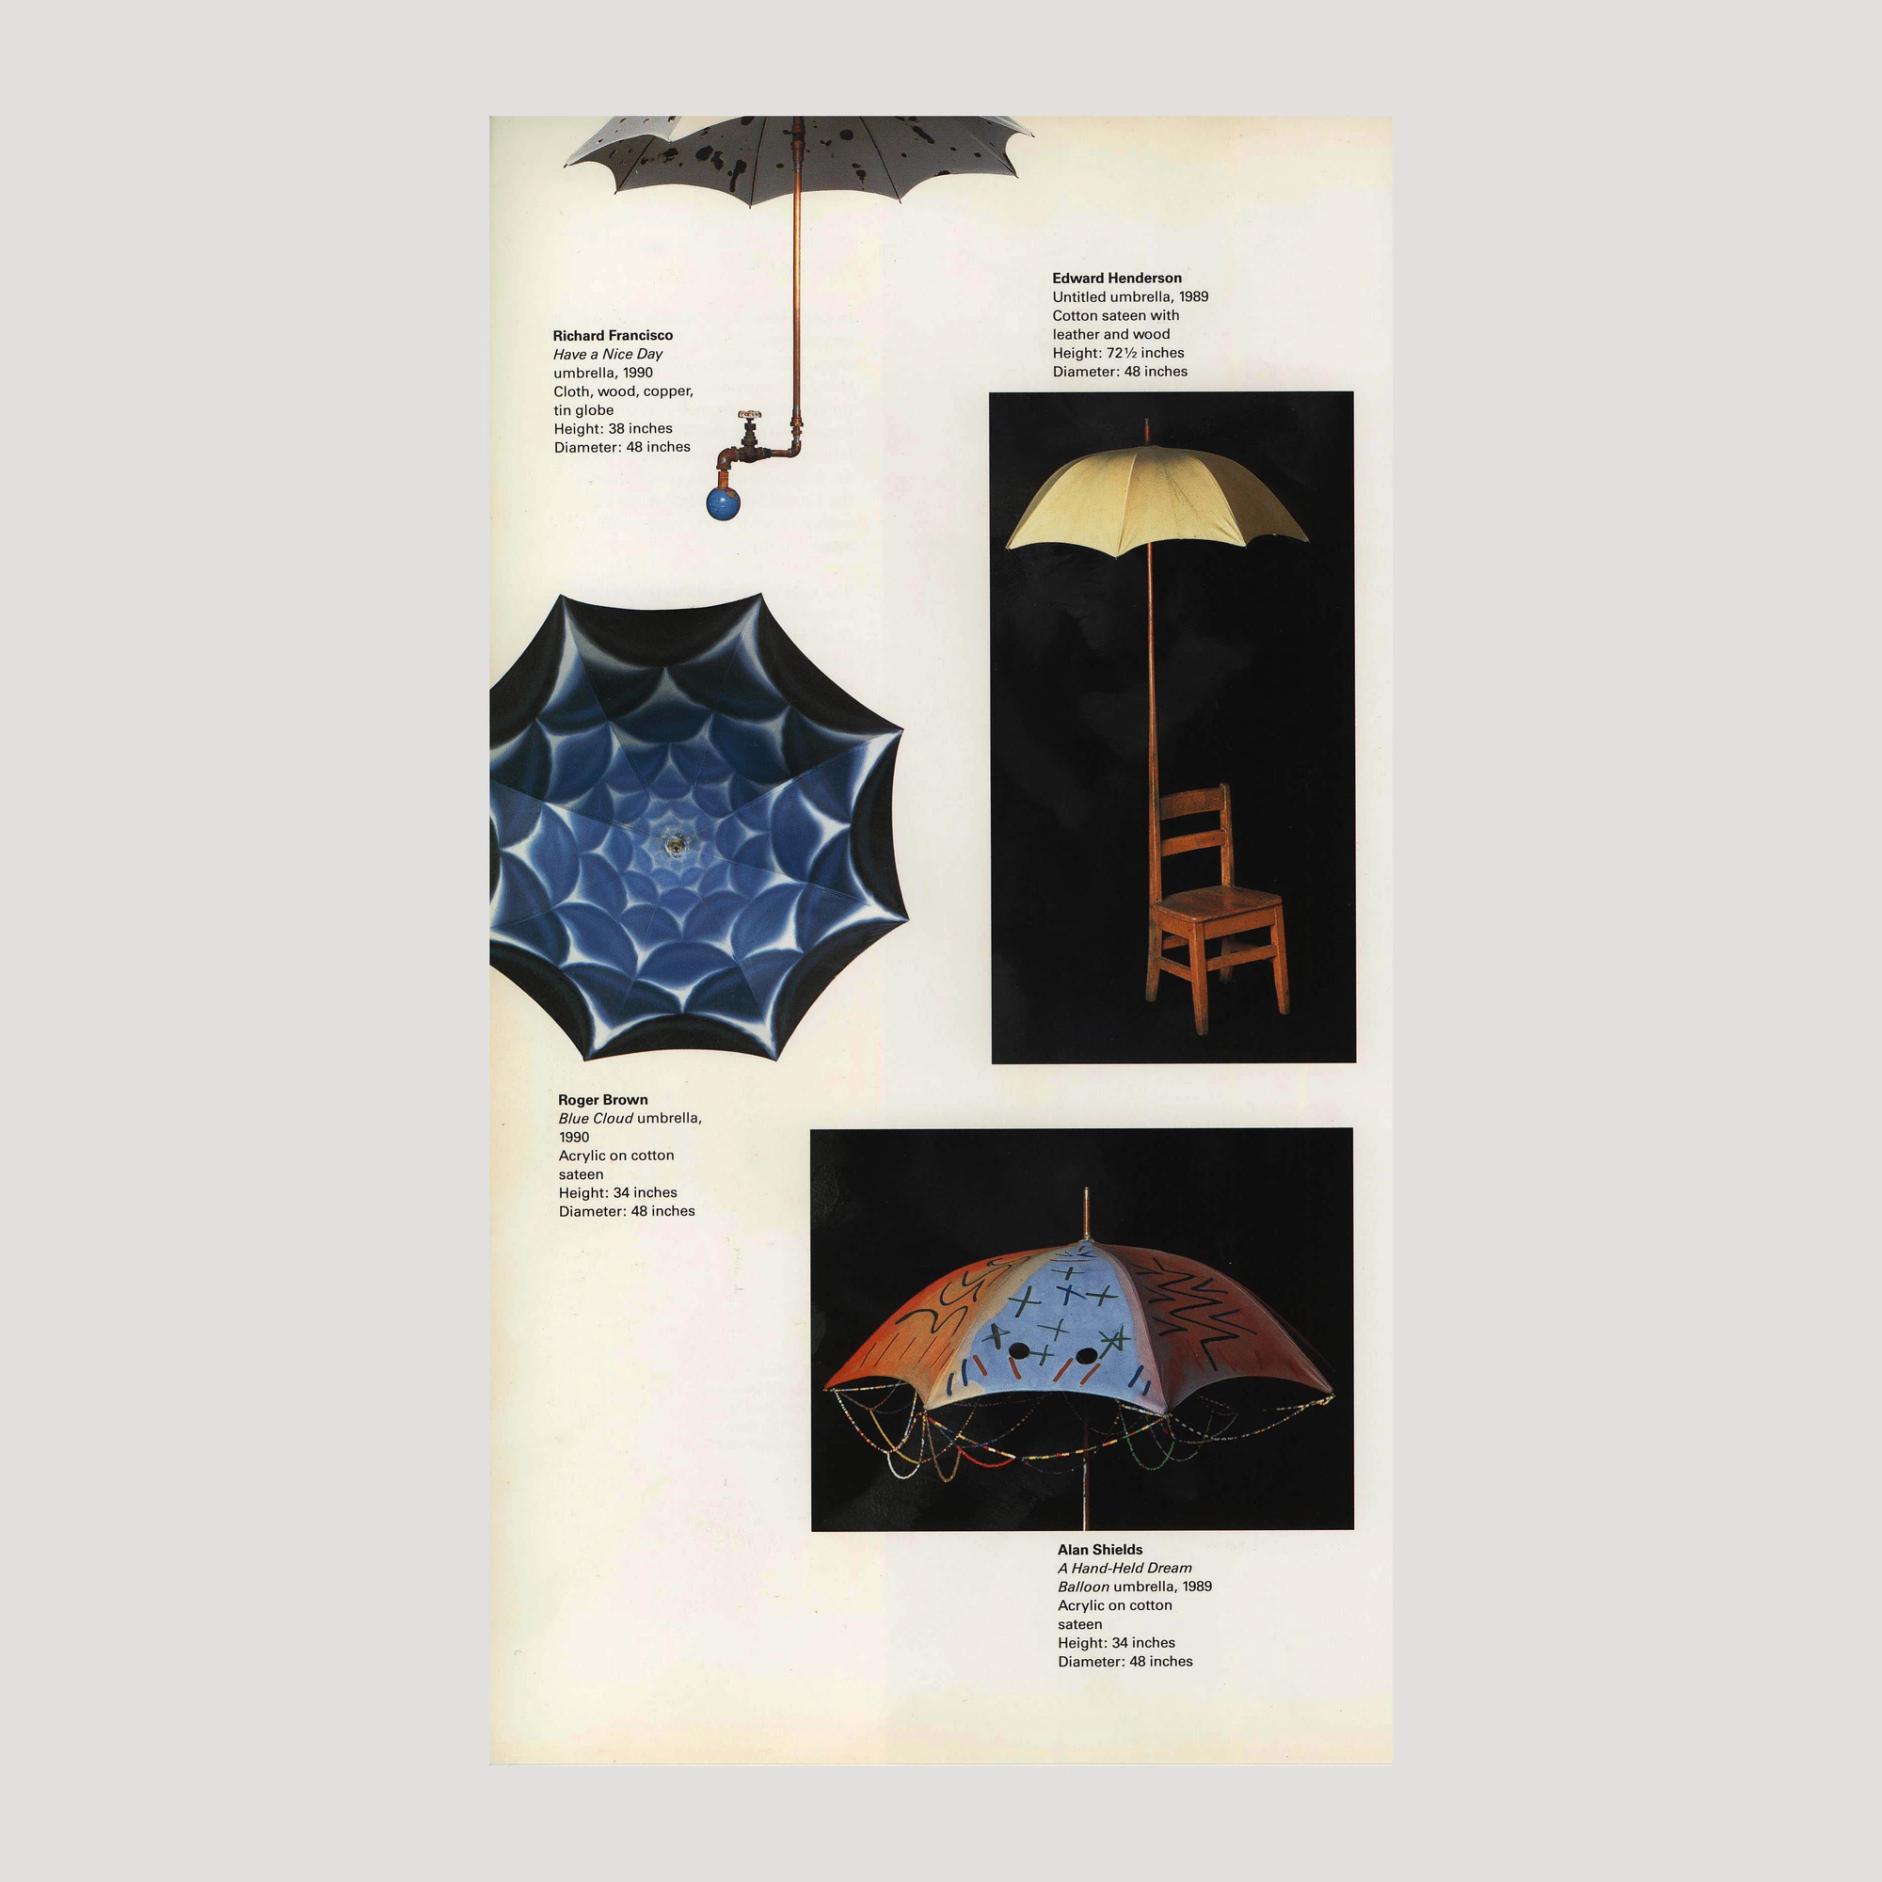 A one-page preview featuring four whimsically designed and inventive umbrellas.